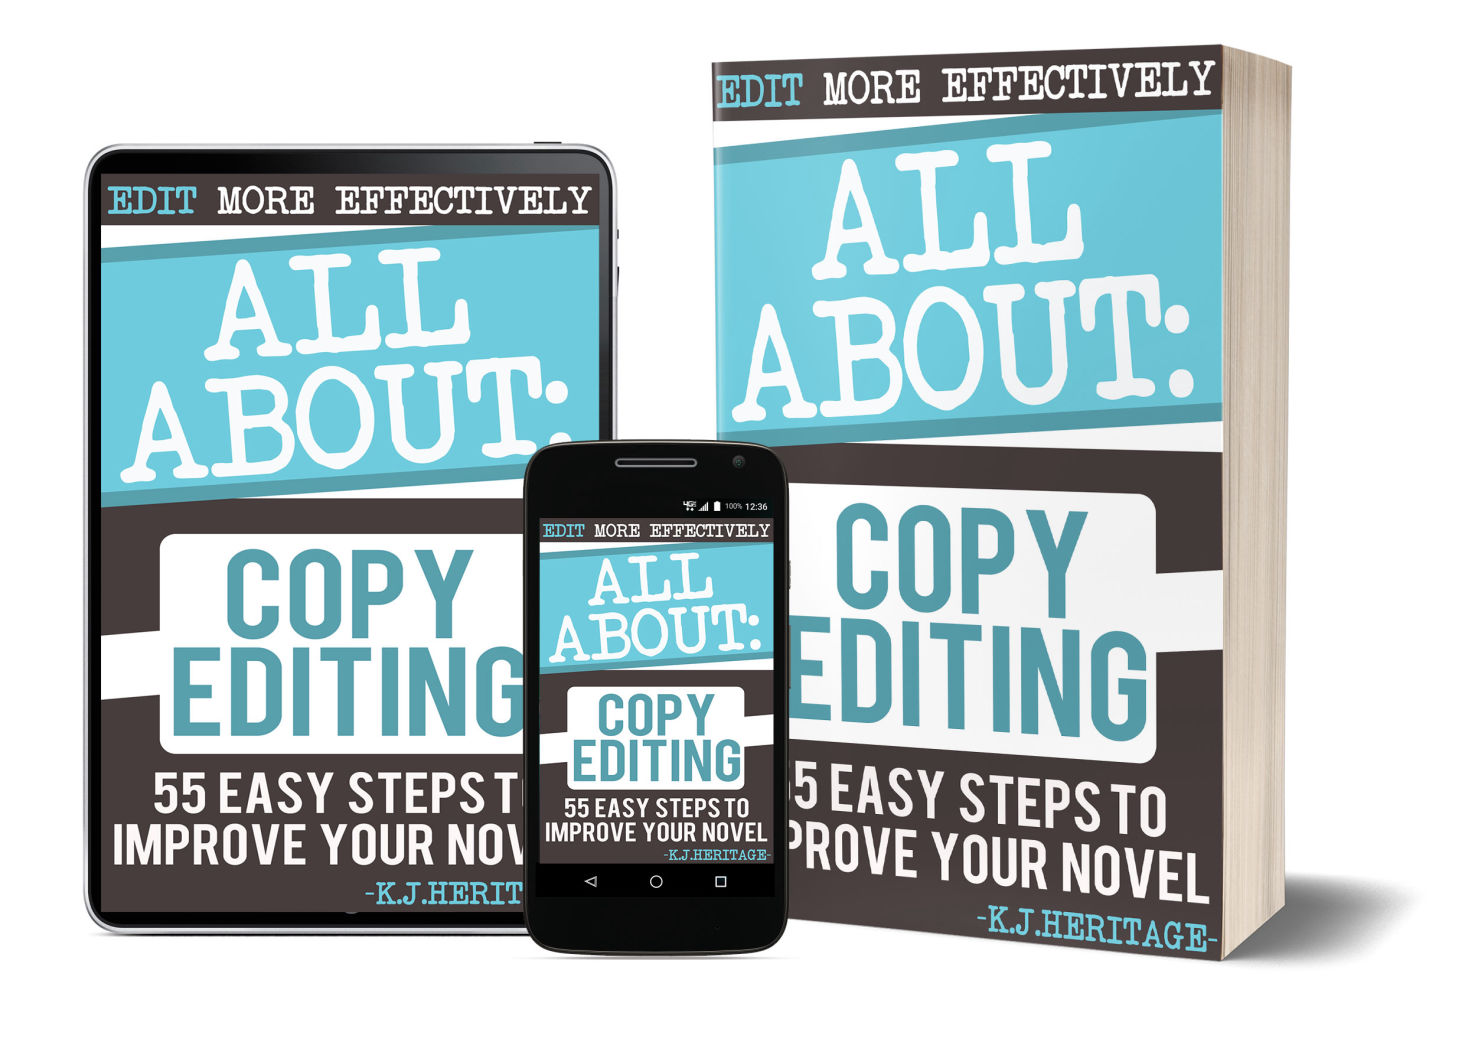 All About Copyediting by K.J.Heritage